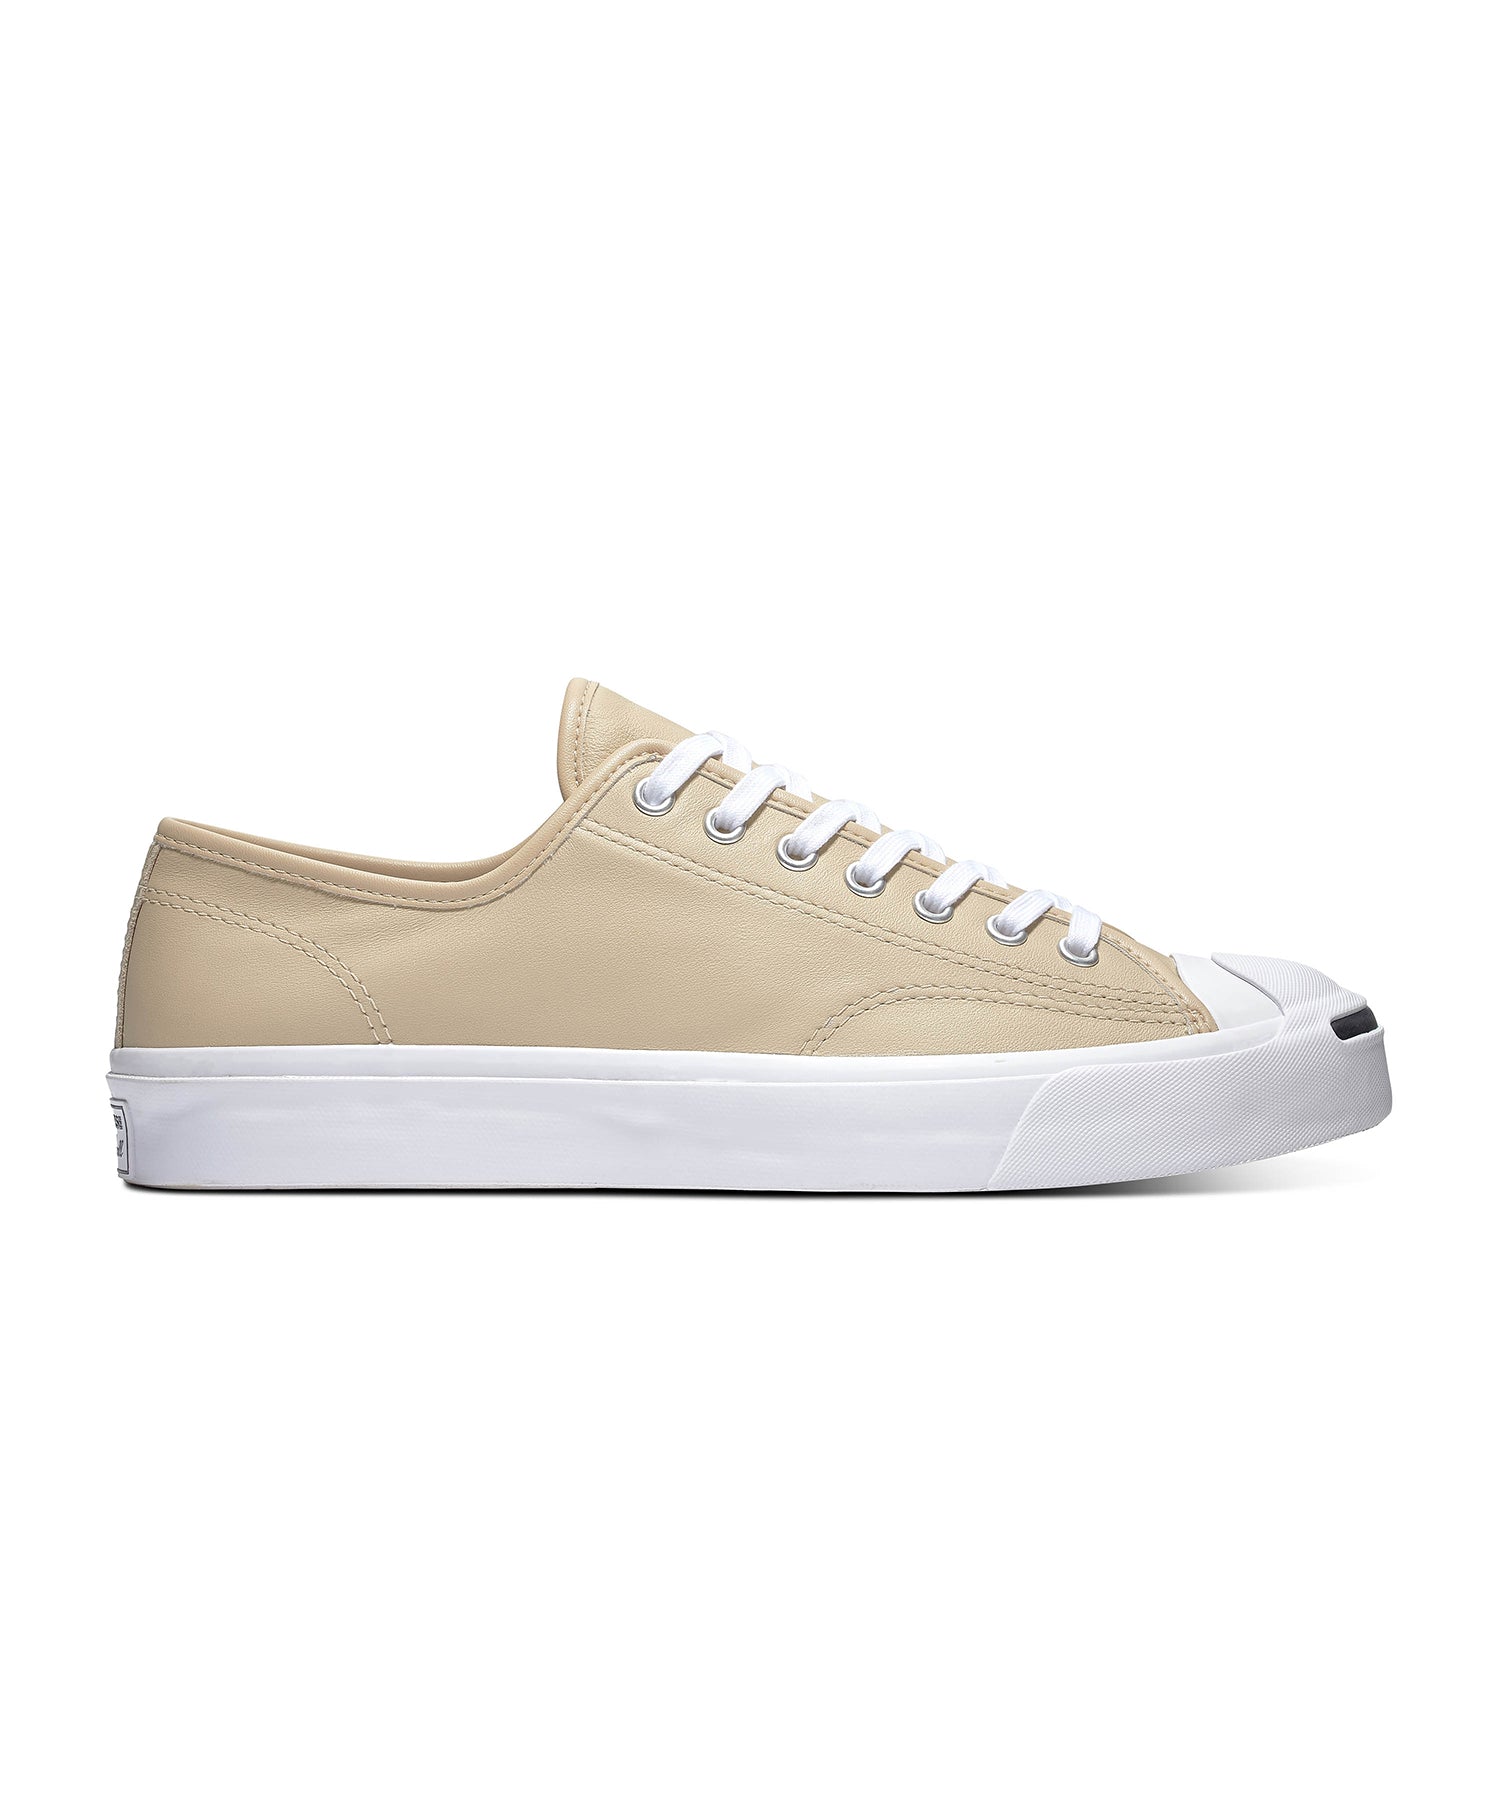 jack purcell converse leather